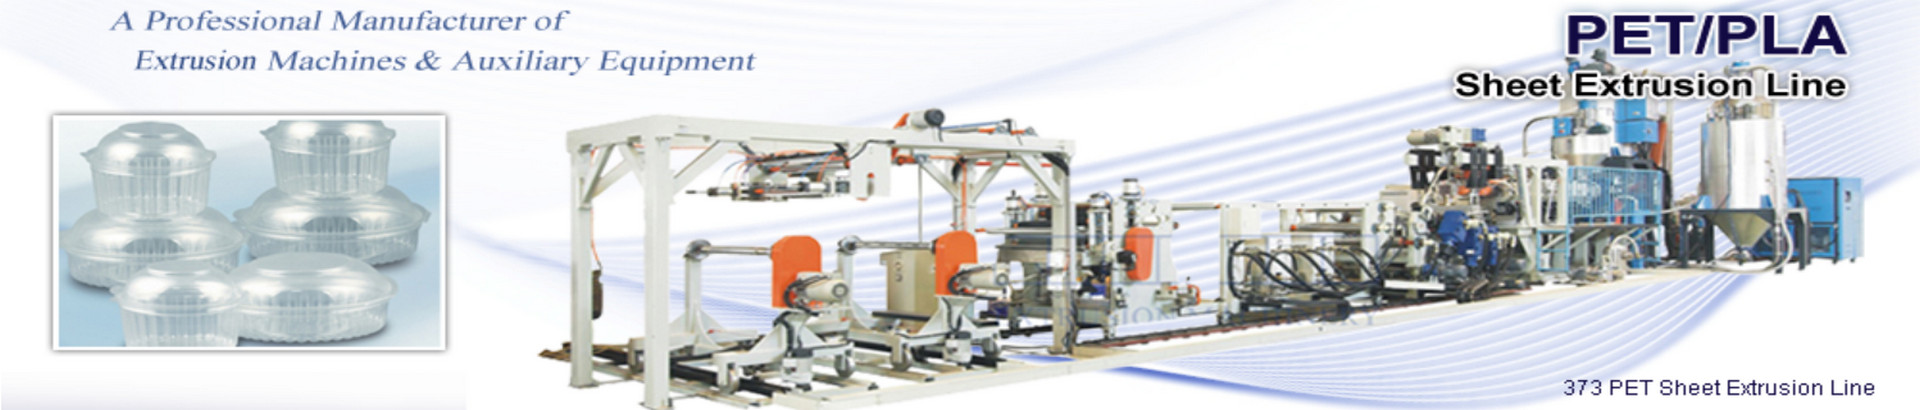 Shang Ta Chia Ind. CO., Unlocking the Potential of Plastic Sheet Extrusion Machines